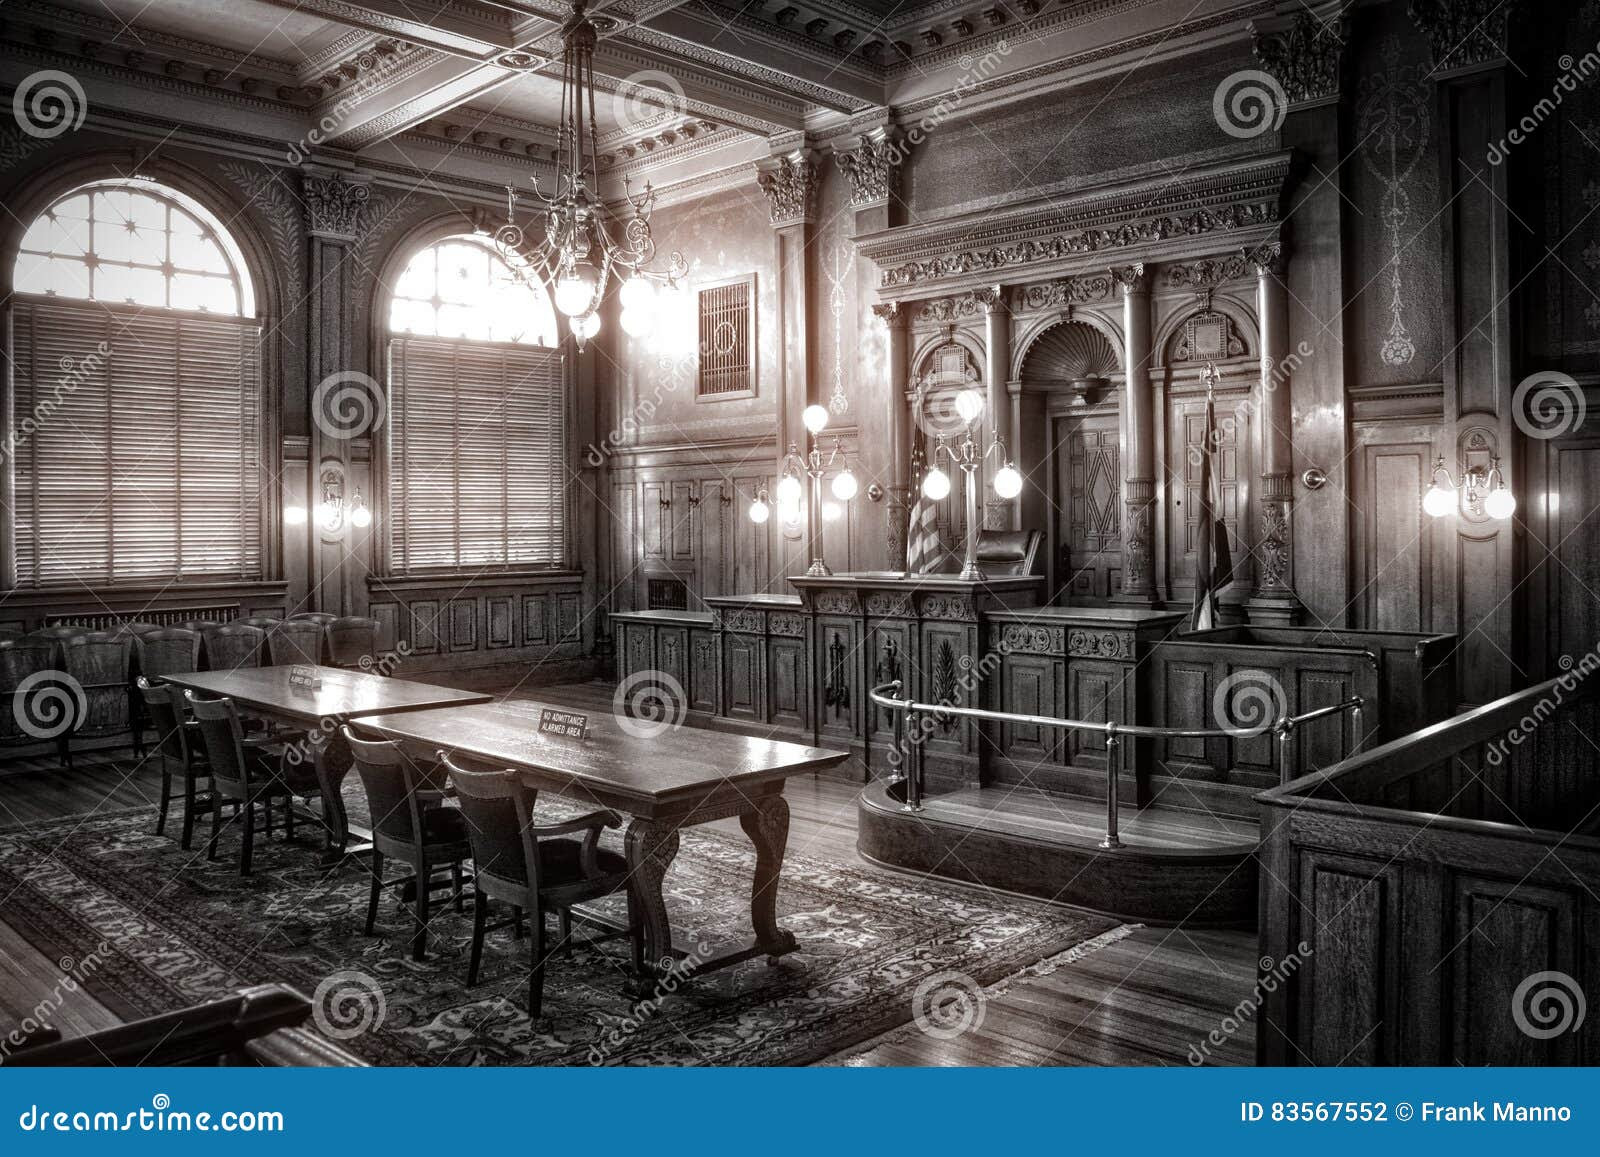 A Courtroom From the Last Century Court room